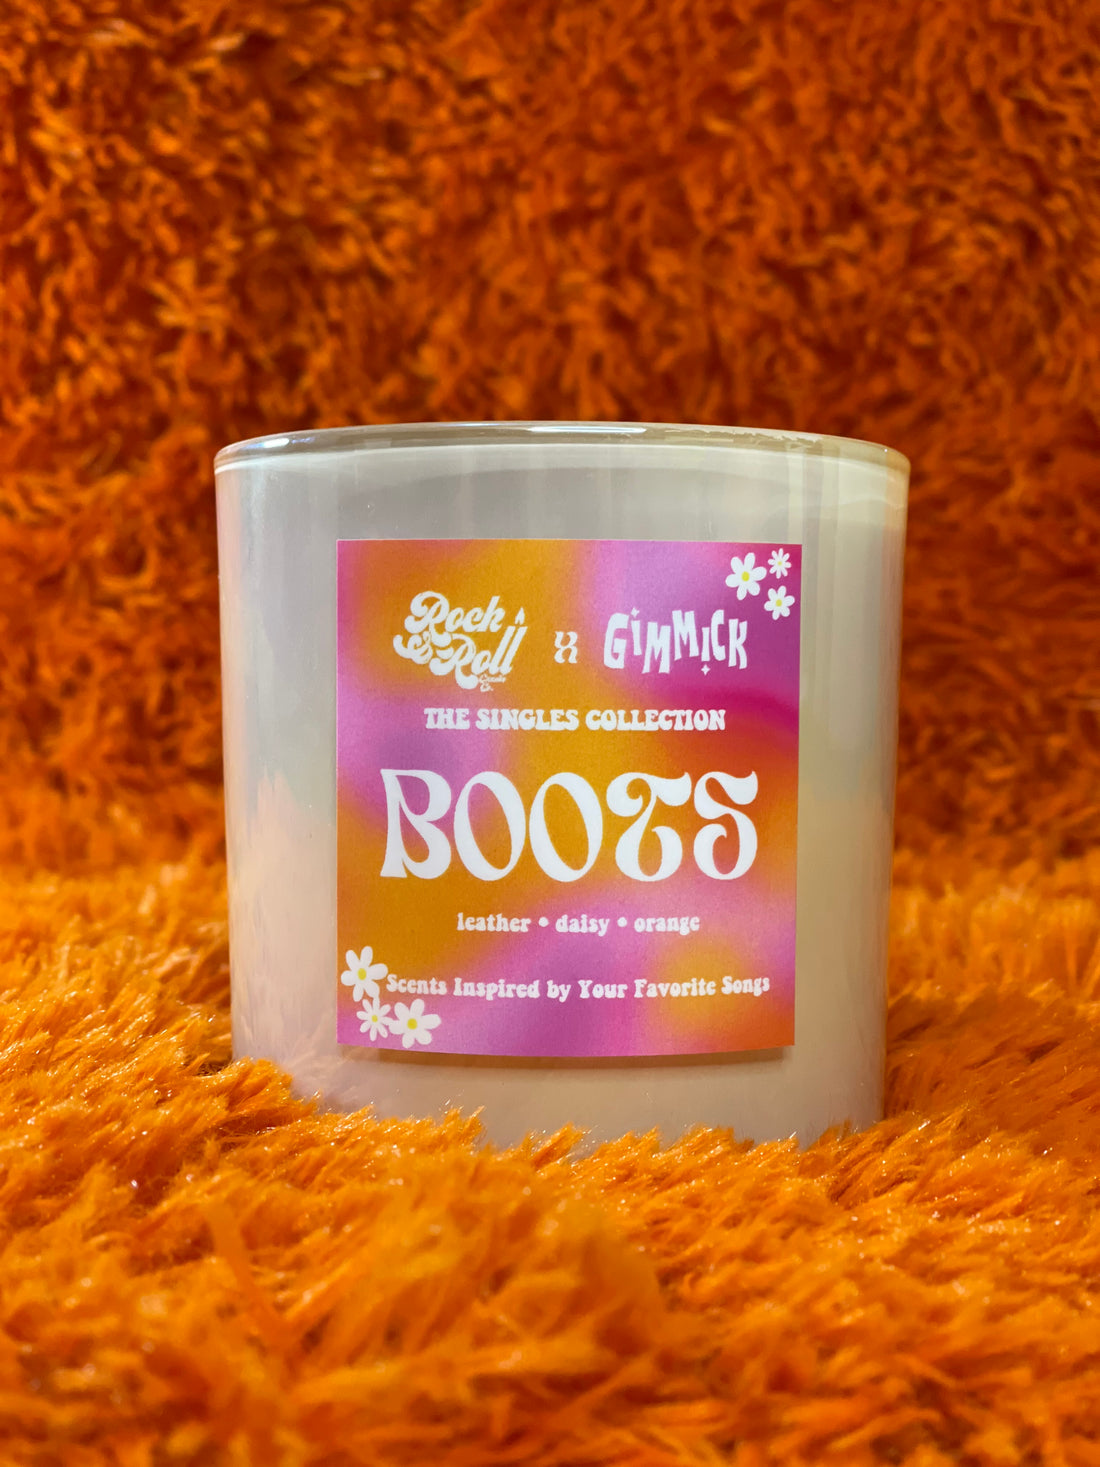 The New 1960's Inspired Candle!